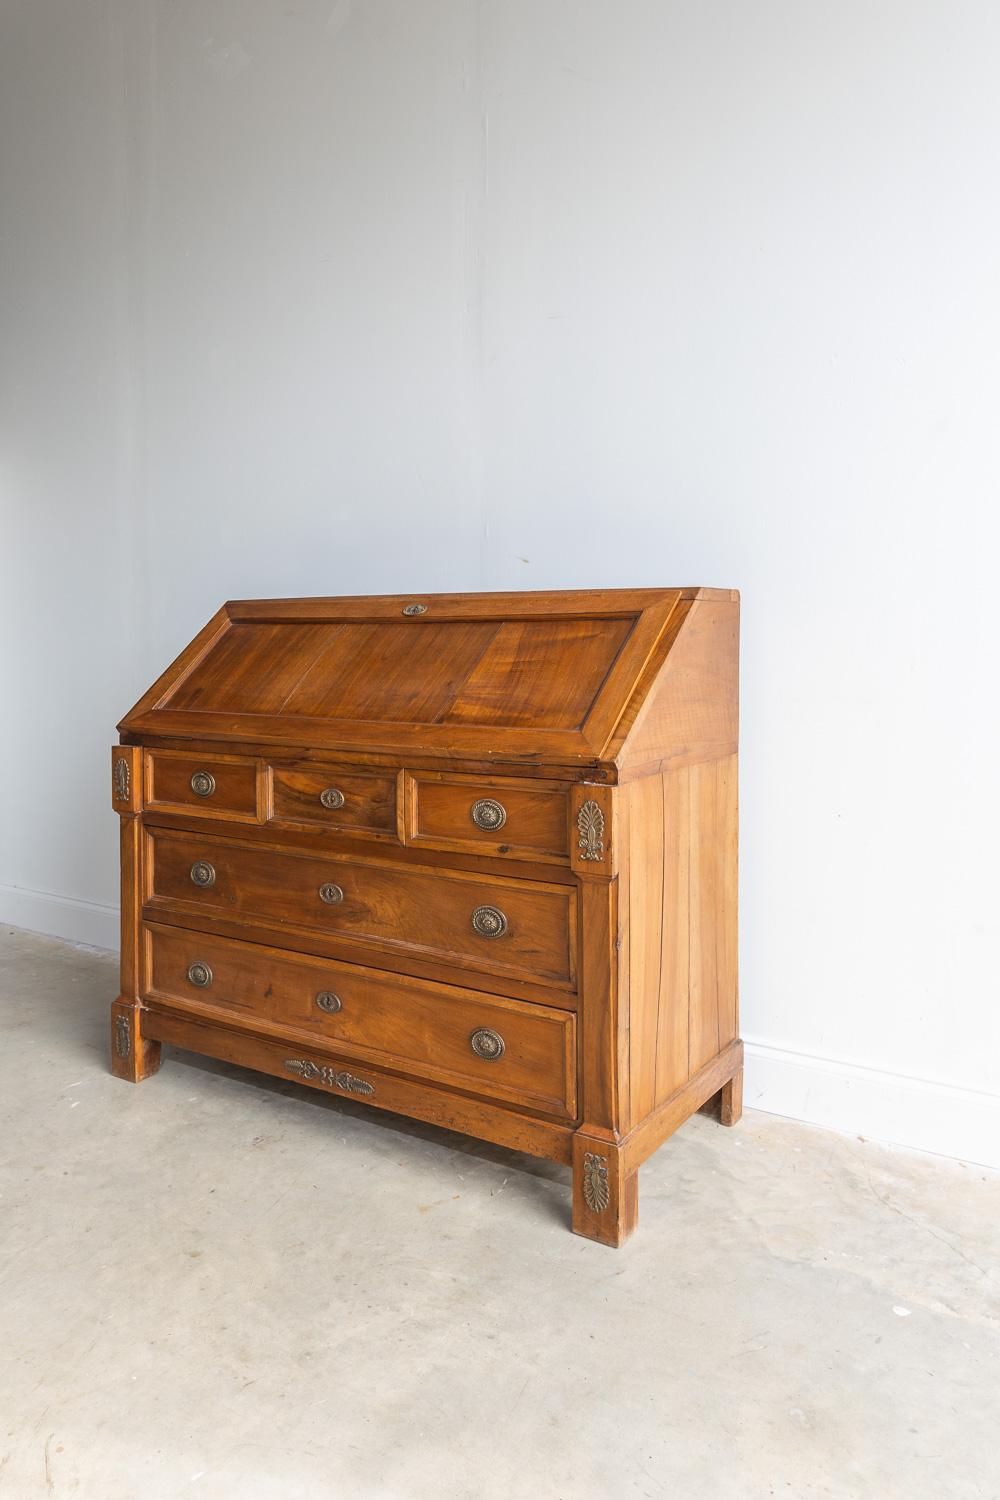 This directory secretary was crafted in 1810, yet the condition of this desk seems practically new. The dark wood color is a beautiful stained walnut. There are two big lower drawers and three smaller central drawers. When you open the cabinet,